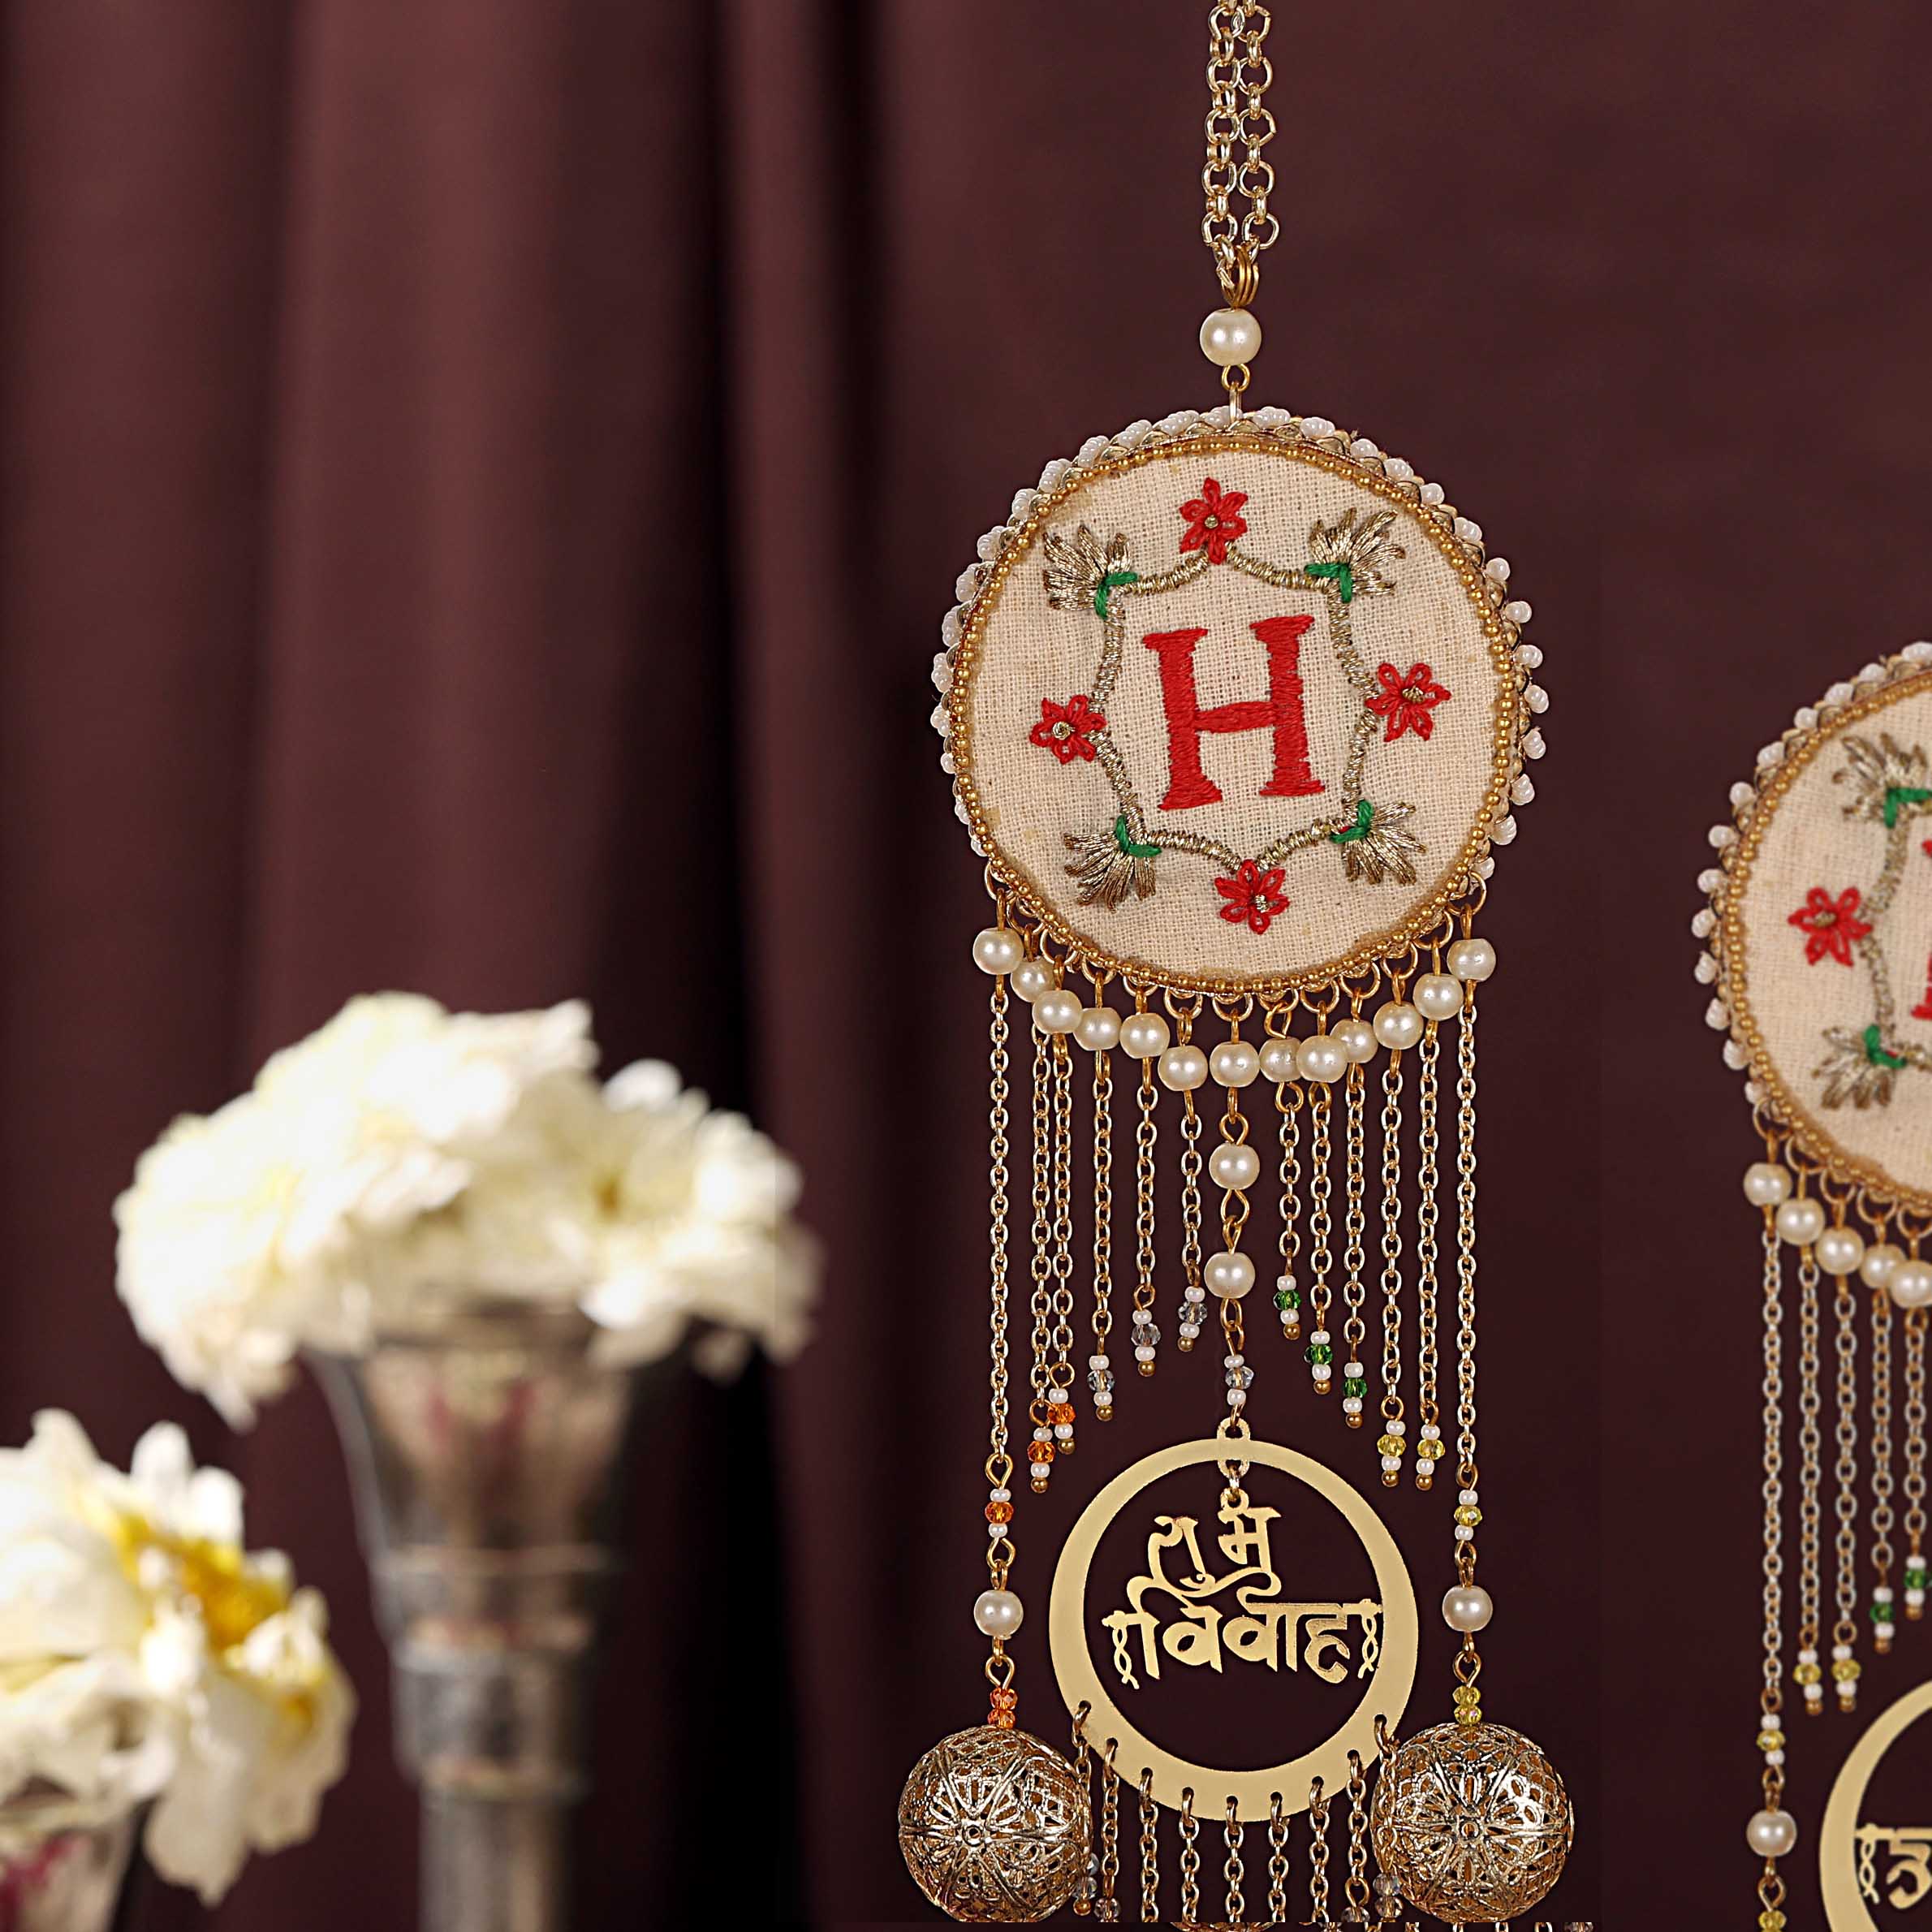 Hand Embroidered Initials Saat Vachan Shubh Vivah Charms Flat Kaleere - Set Of 2 Pieces